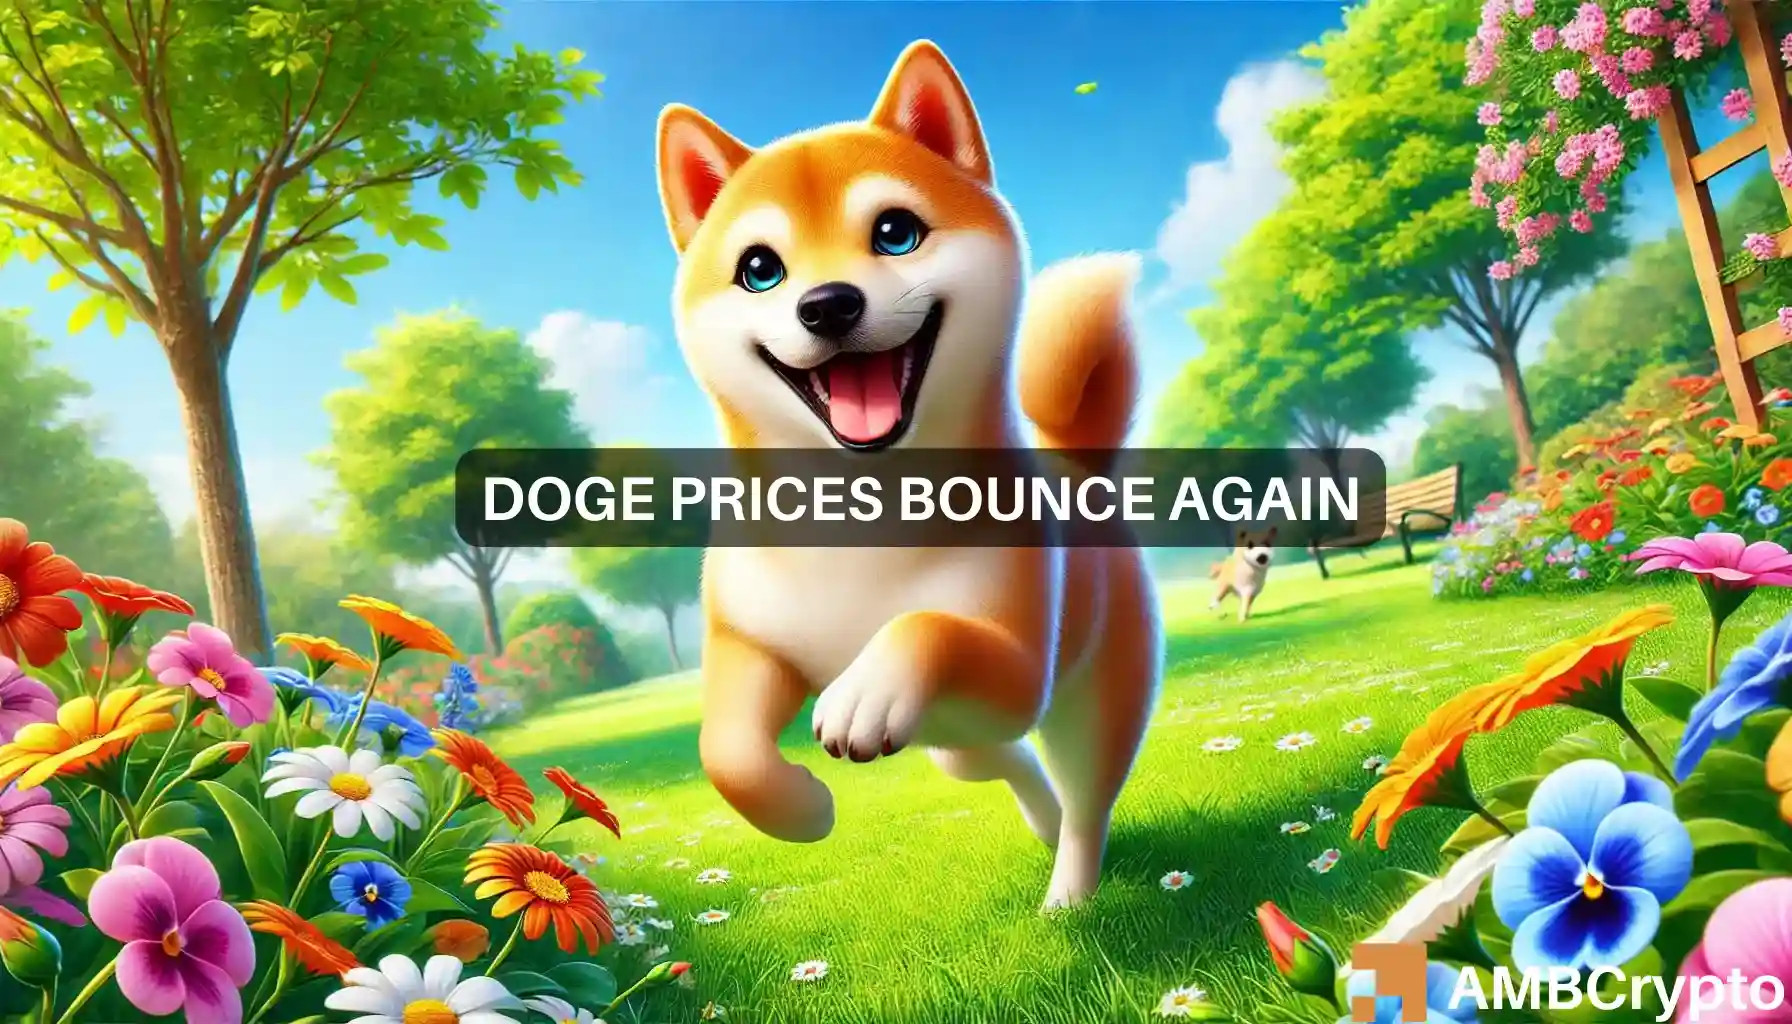 Dogecoin traders, look out for Bitcoin's effect on the memecoin because...